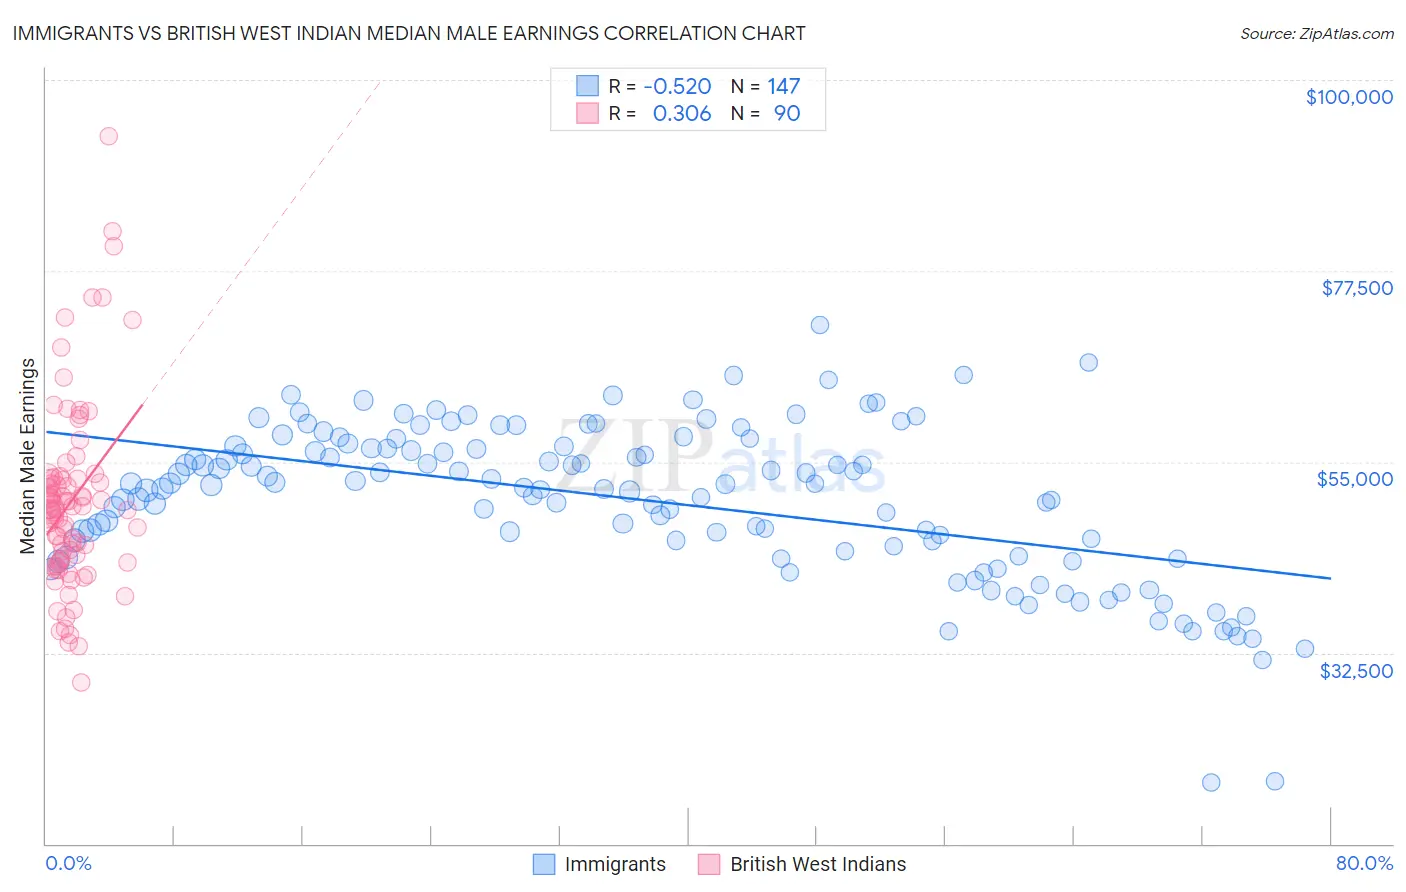 Immigrants vs British West Indian Median Male Earnings